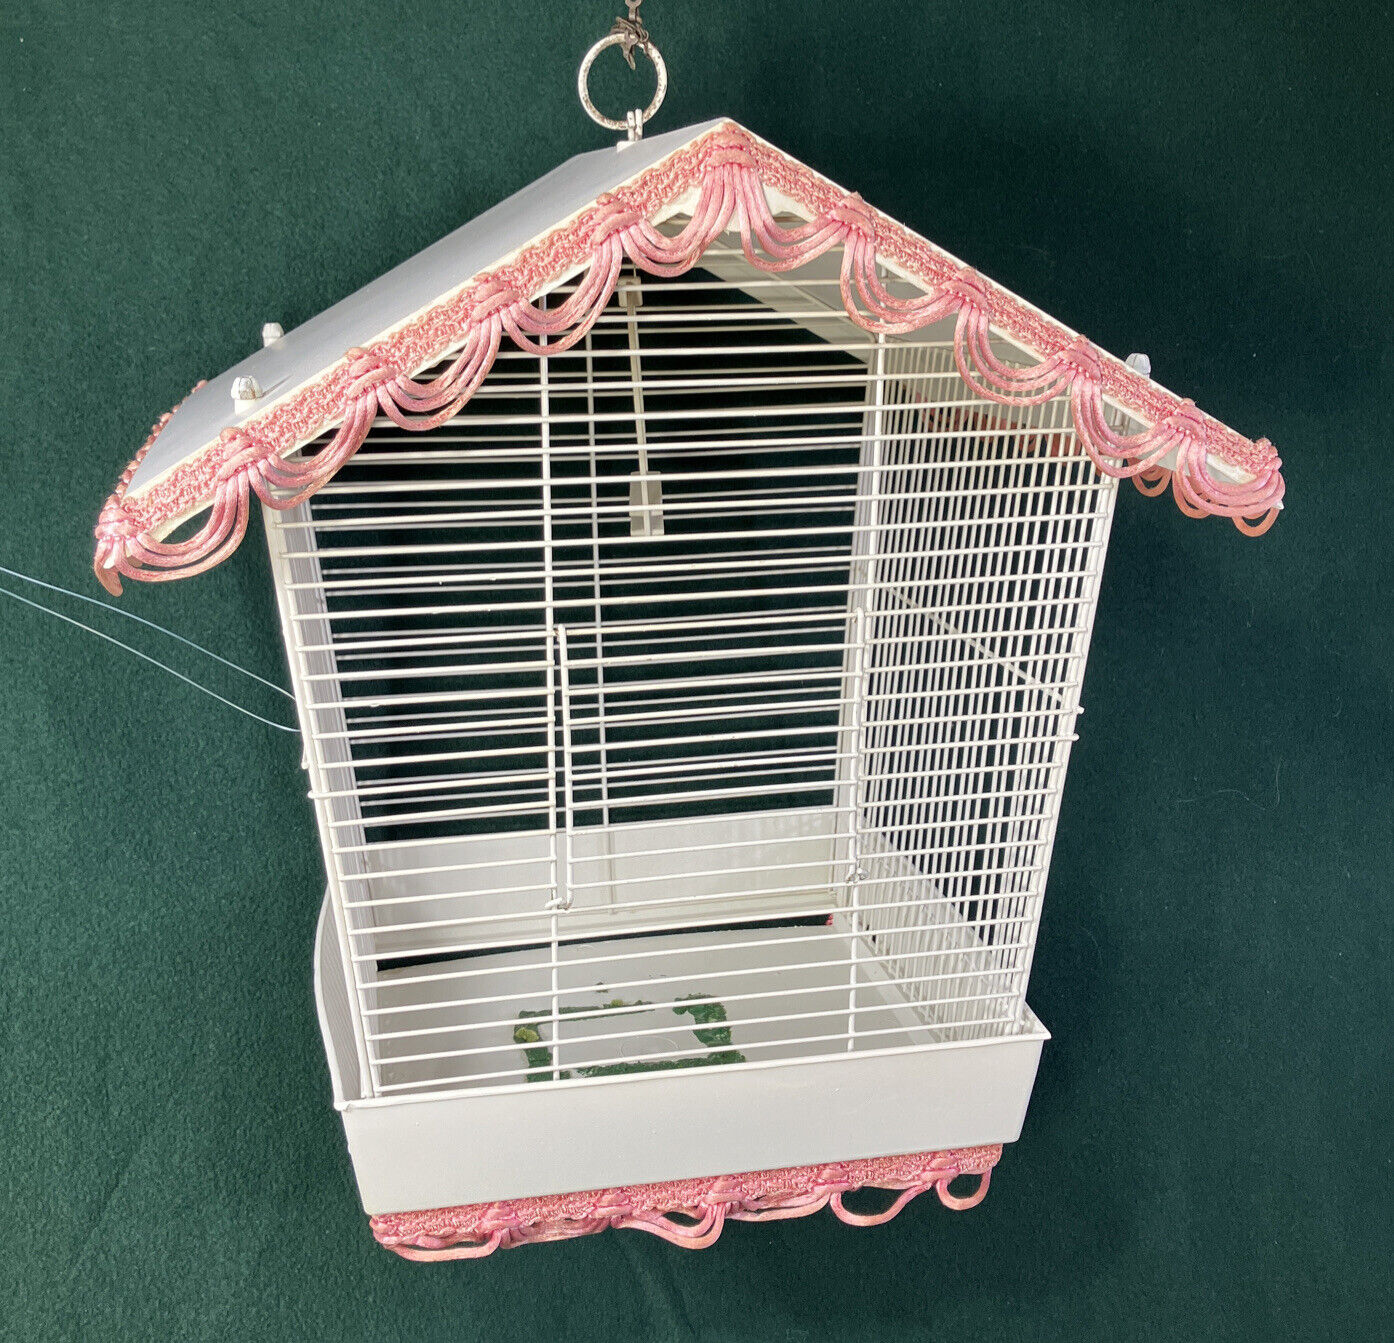 Vintage 15x15x14.5” Metal Pagoda Mid-Century White Bird Cage with Pink Fringe